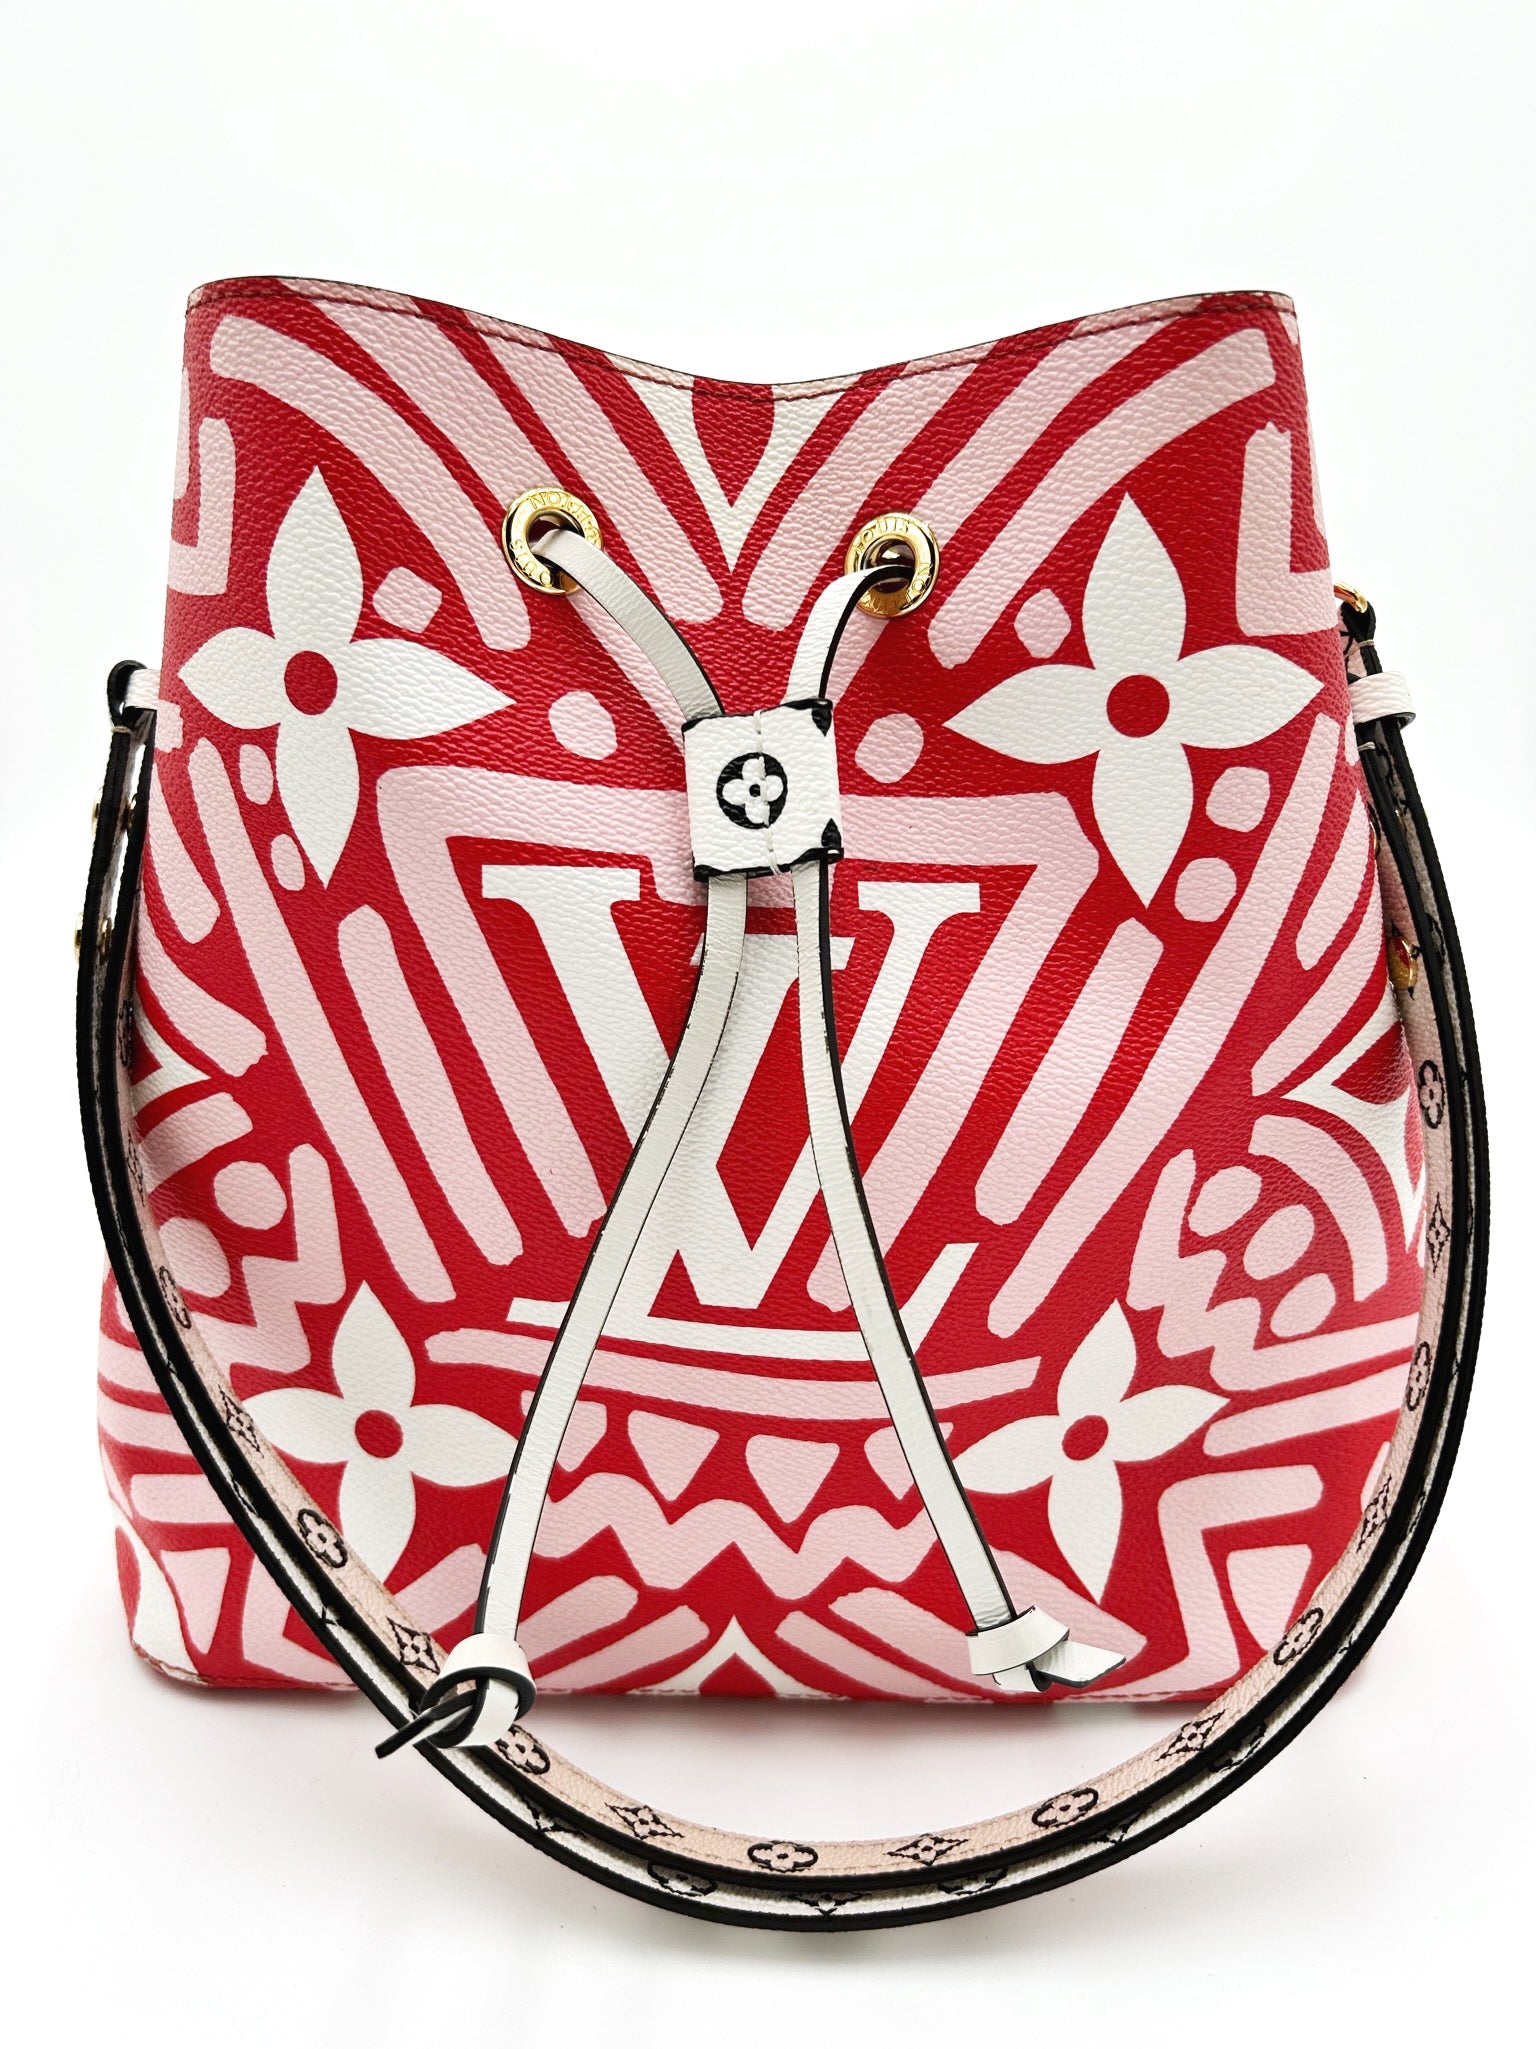 LV NEONOE MM LIMITED EDITION BUCKET BAG IN RED LEATHER